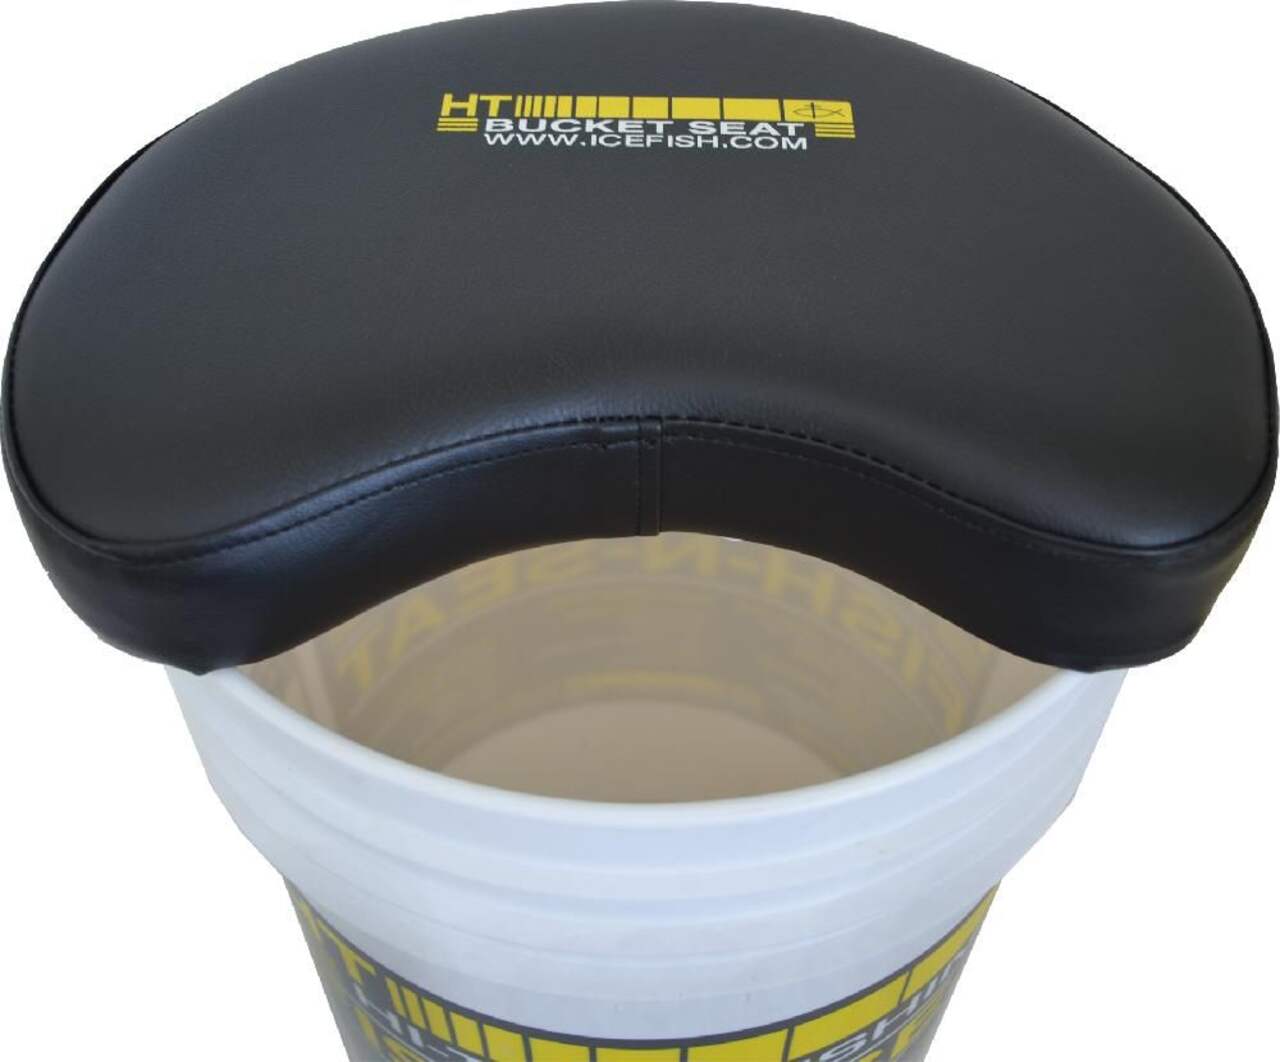 https://media-www.canadiantire.ca/product/playing/fishing/ice-fishing/0784719/ht-padded-bucket-seat-fits-5-6-gallon-pails-18cf5438-5166-45b4-a9c6-877cefad65c7-jpgrendition.jpg?imdensity=1&imwidth=1244&impolicy=mZoom